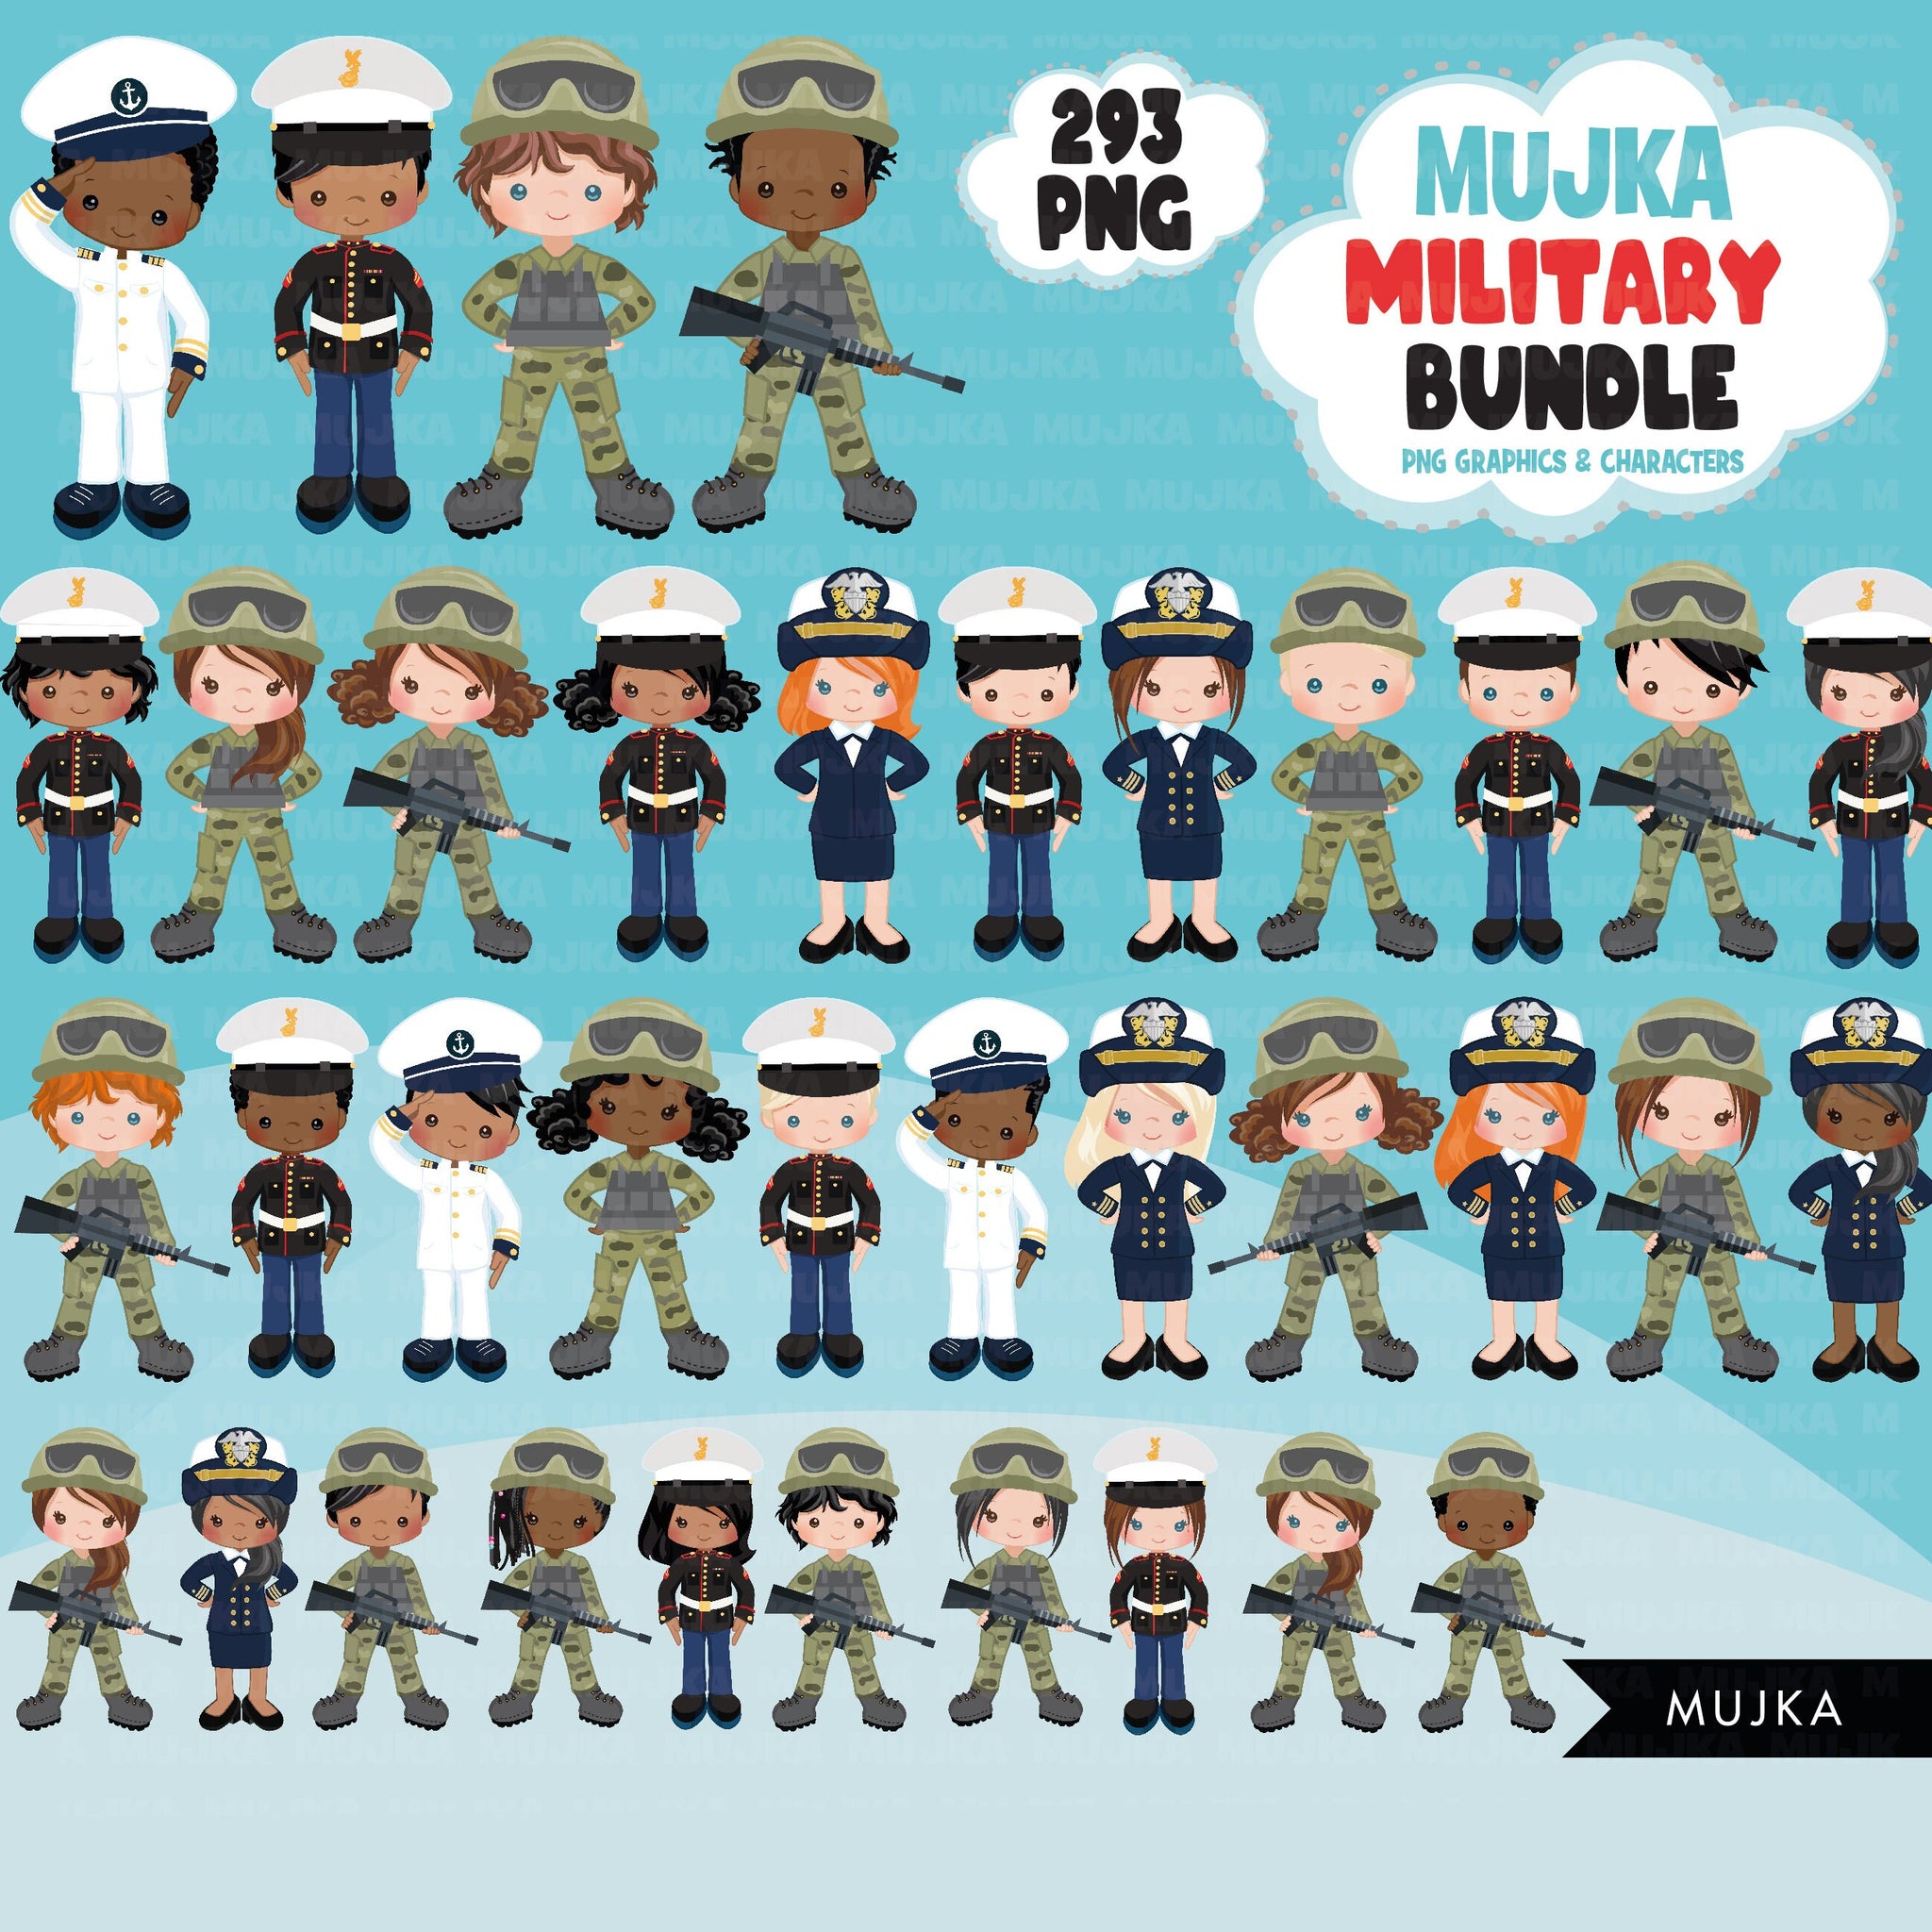 Military PNG Bundle, Soldier clipart, tank soldiers, marines, navy, military graphics, army designs, sublimation designs, digital stickers, boy and girl soldiers